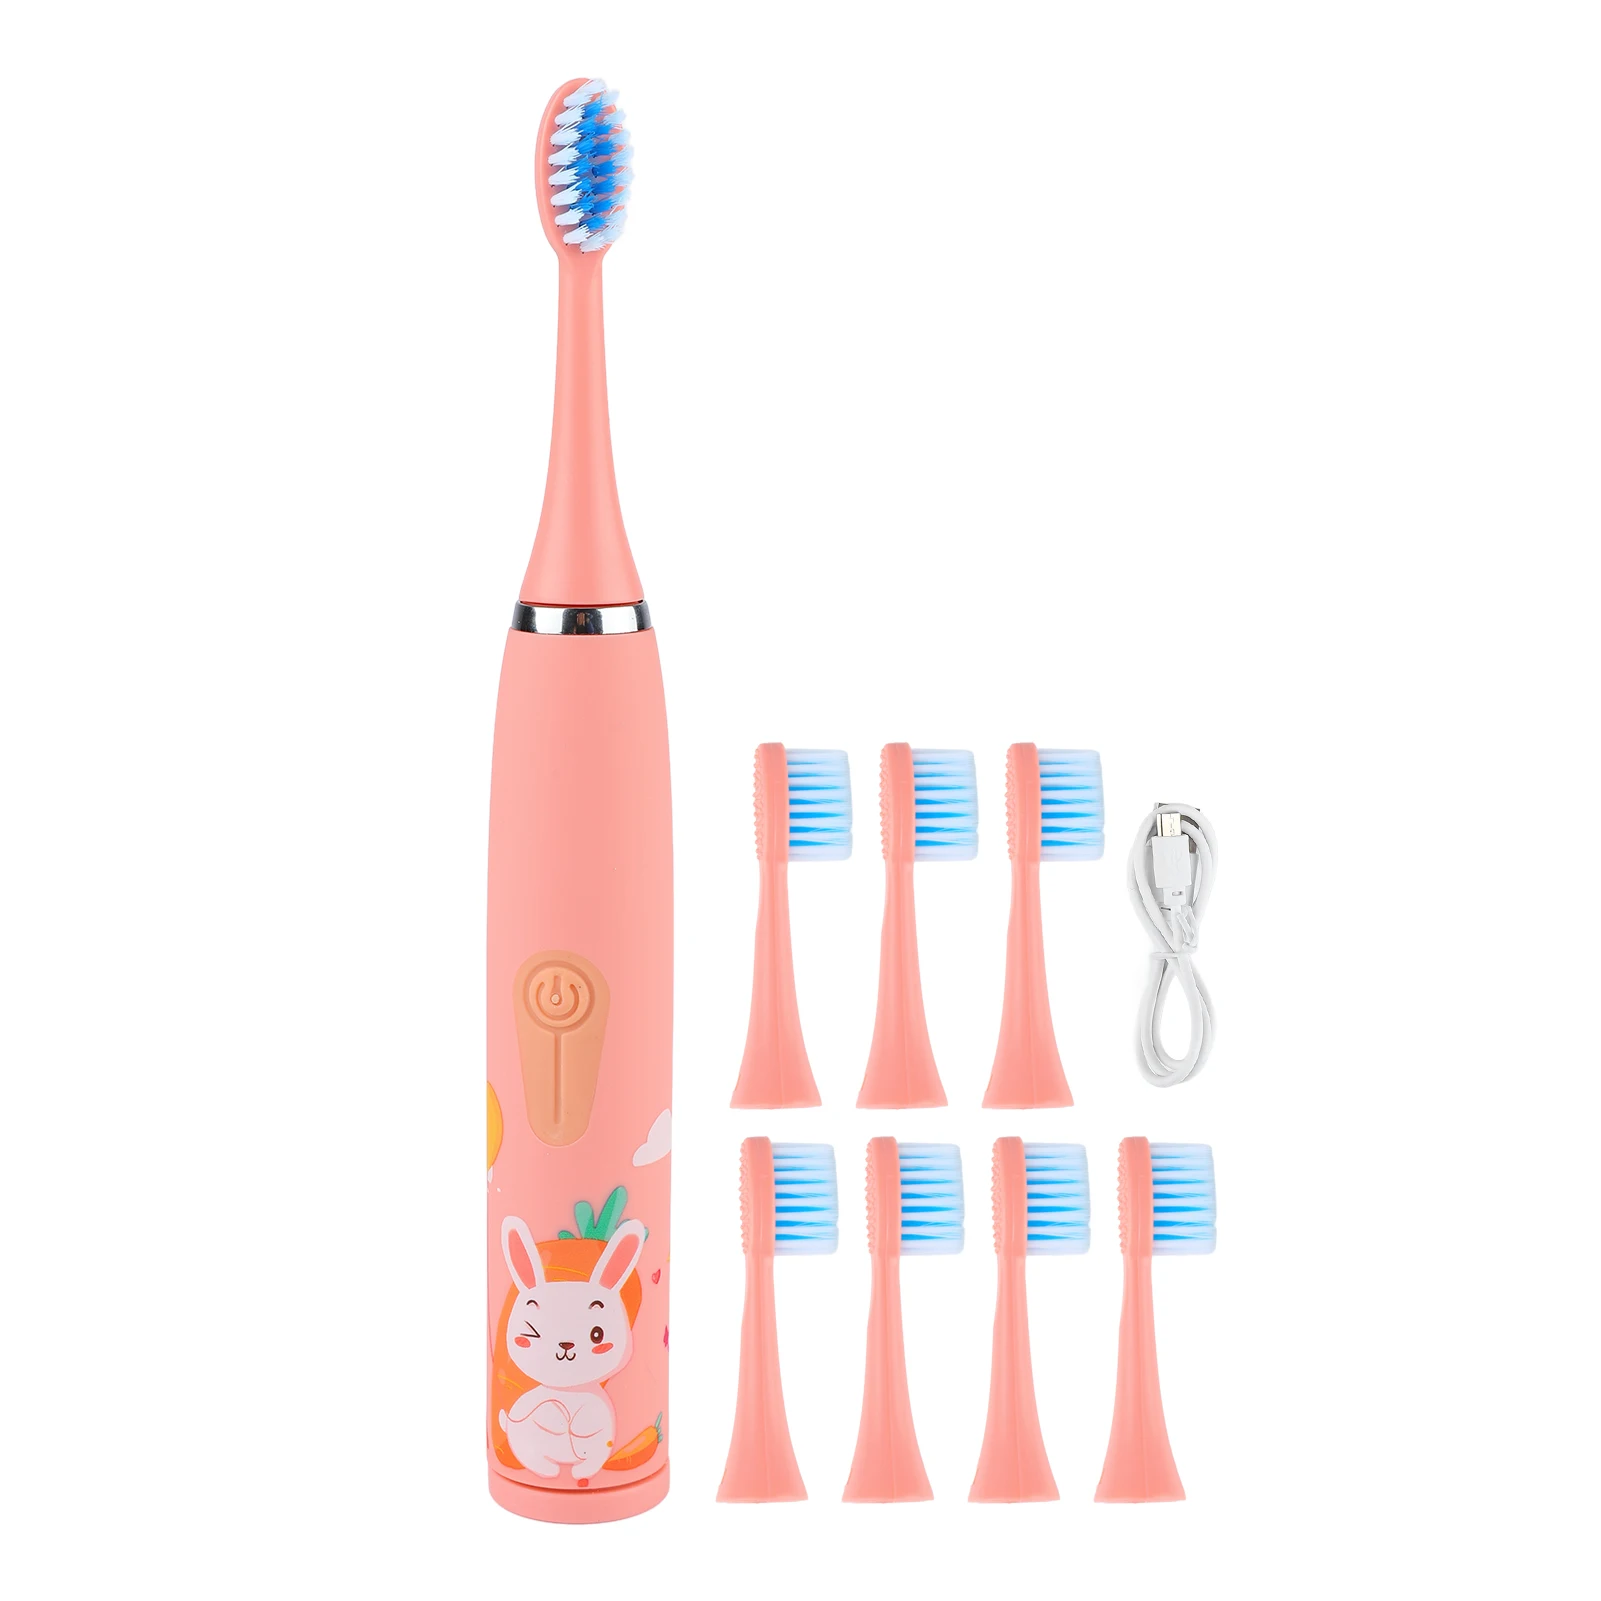 

Children Electric Toothbrush Kids Electric Toothbrush Zone Change Reminder Soft Head Hygienic 8 Brush Heads for Home for Baby